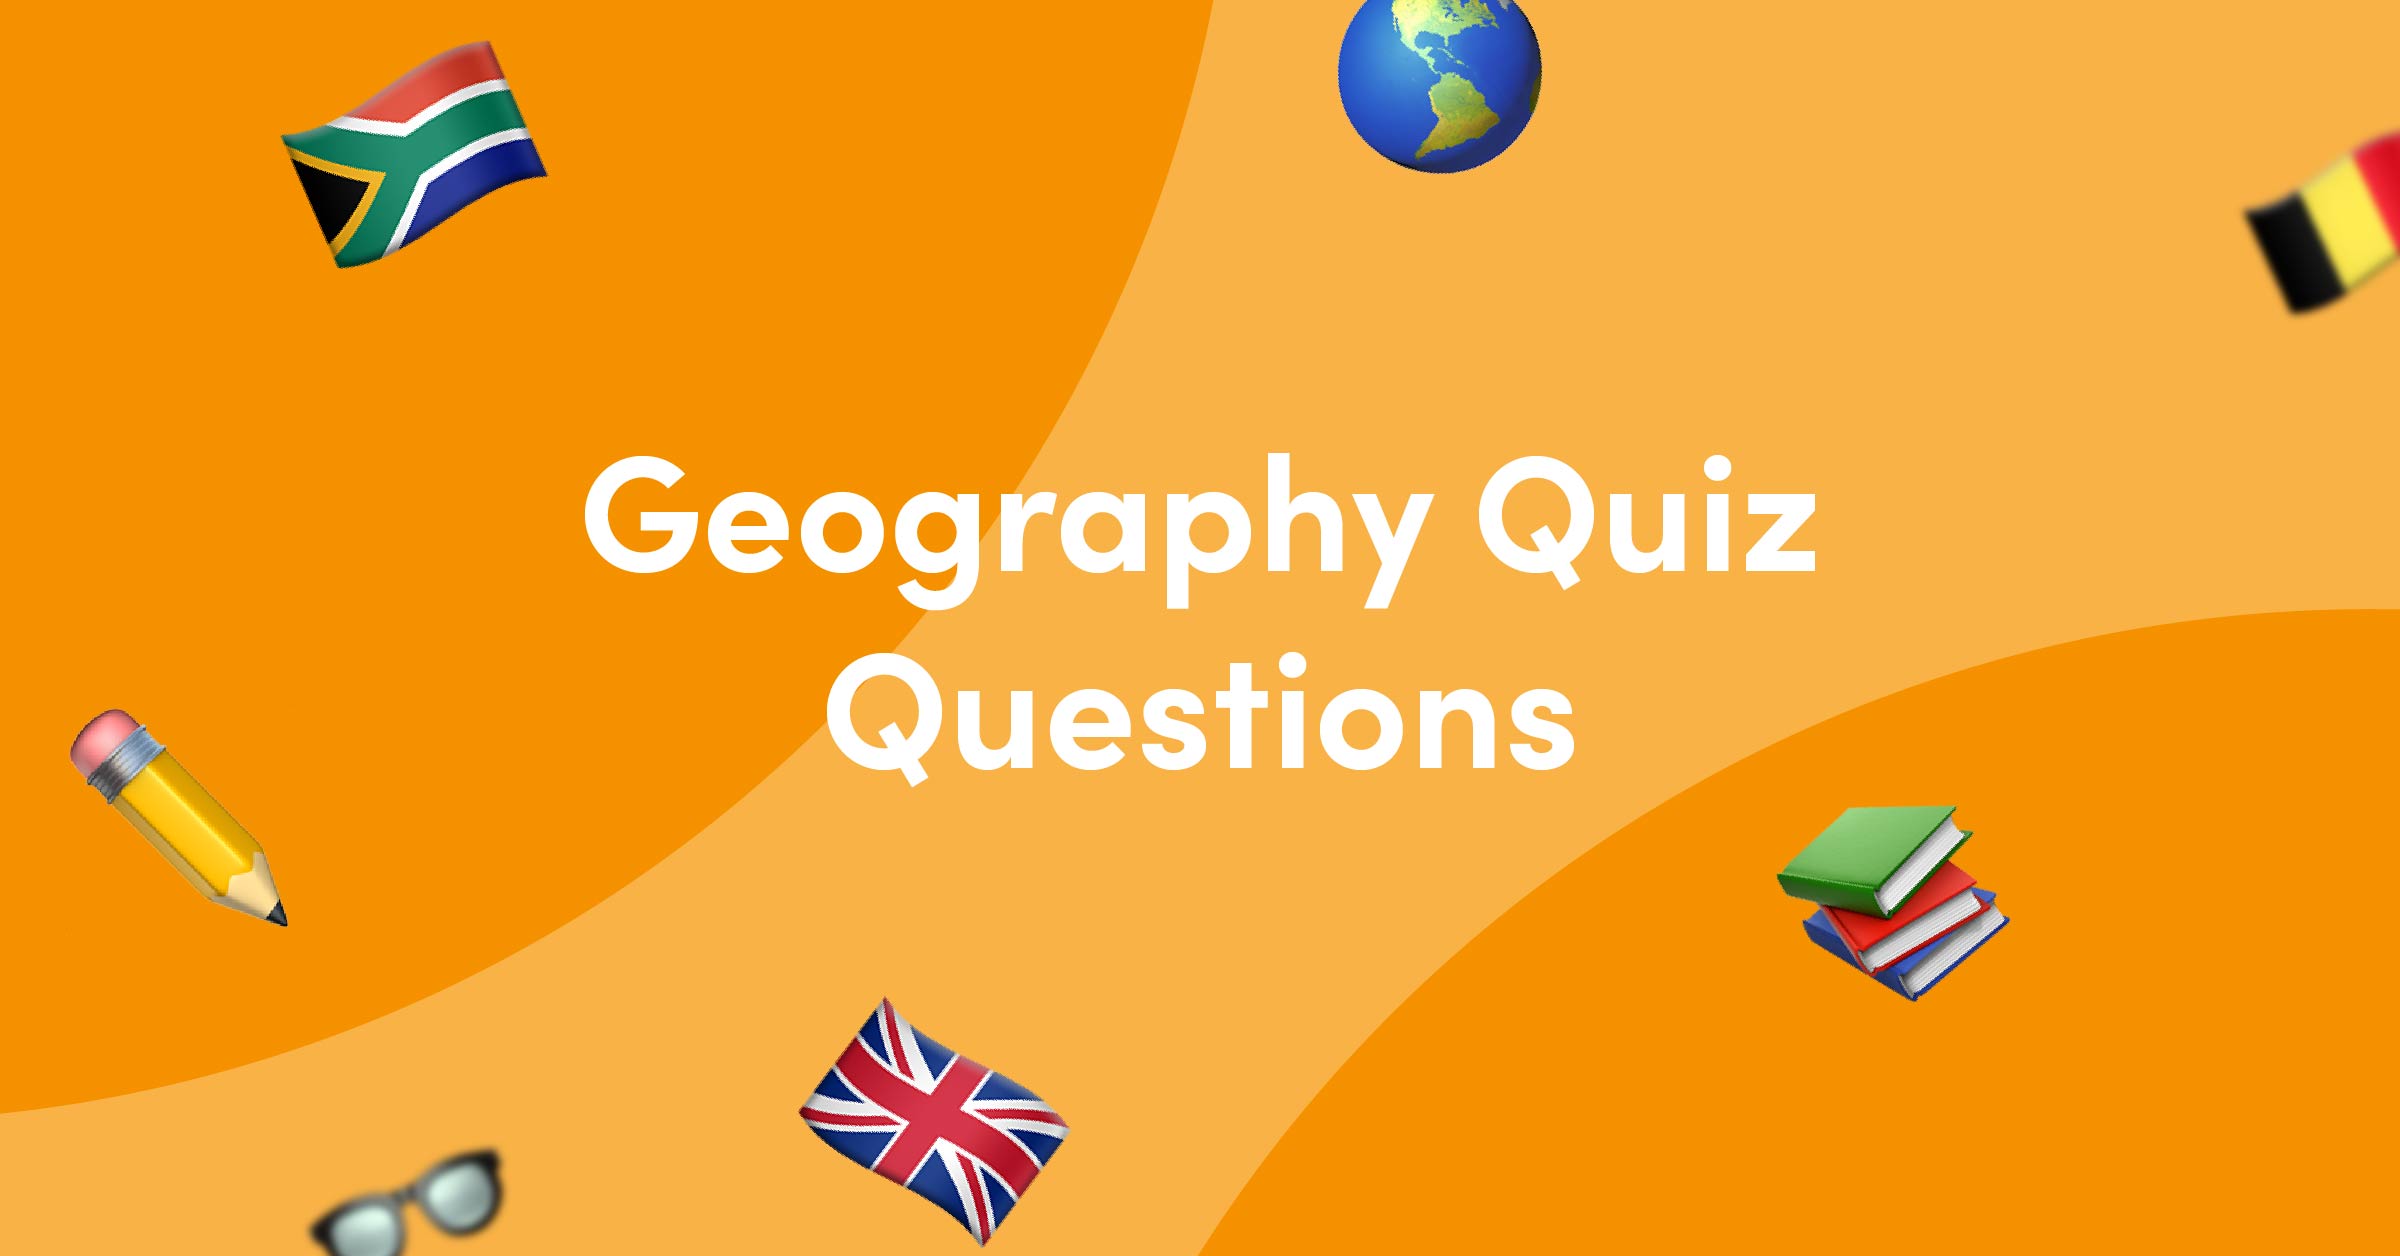 Emojis on orange background for geography quiz questions and answers